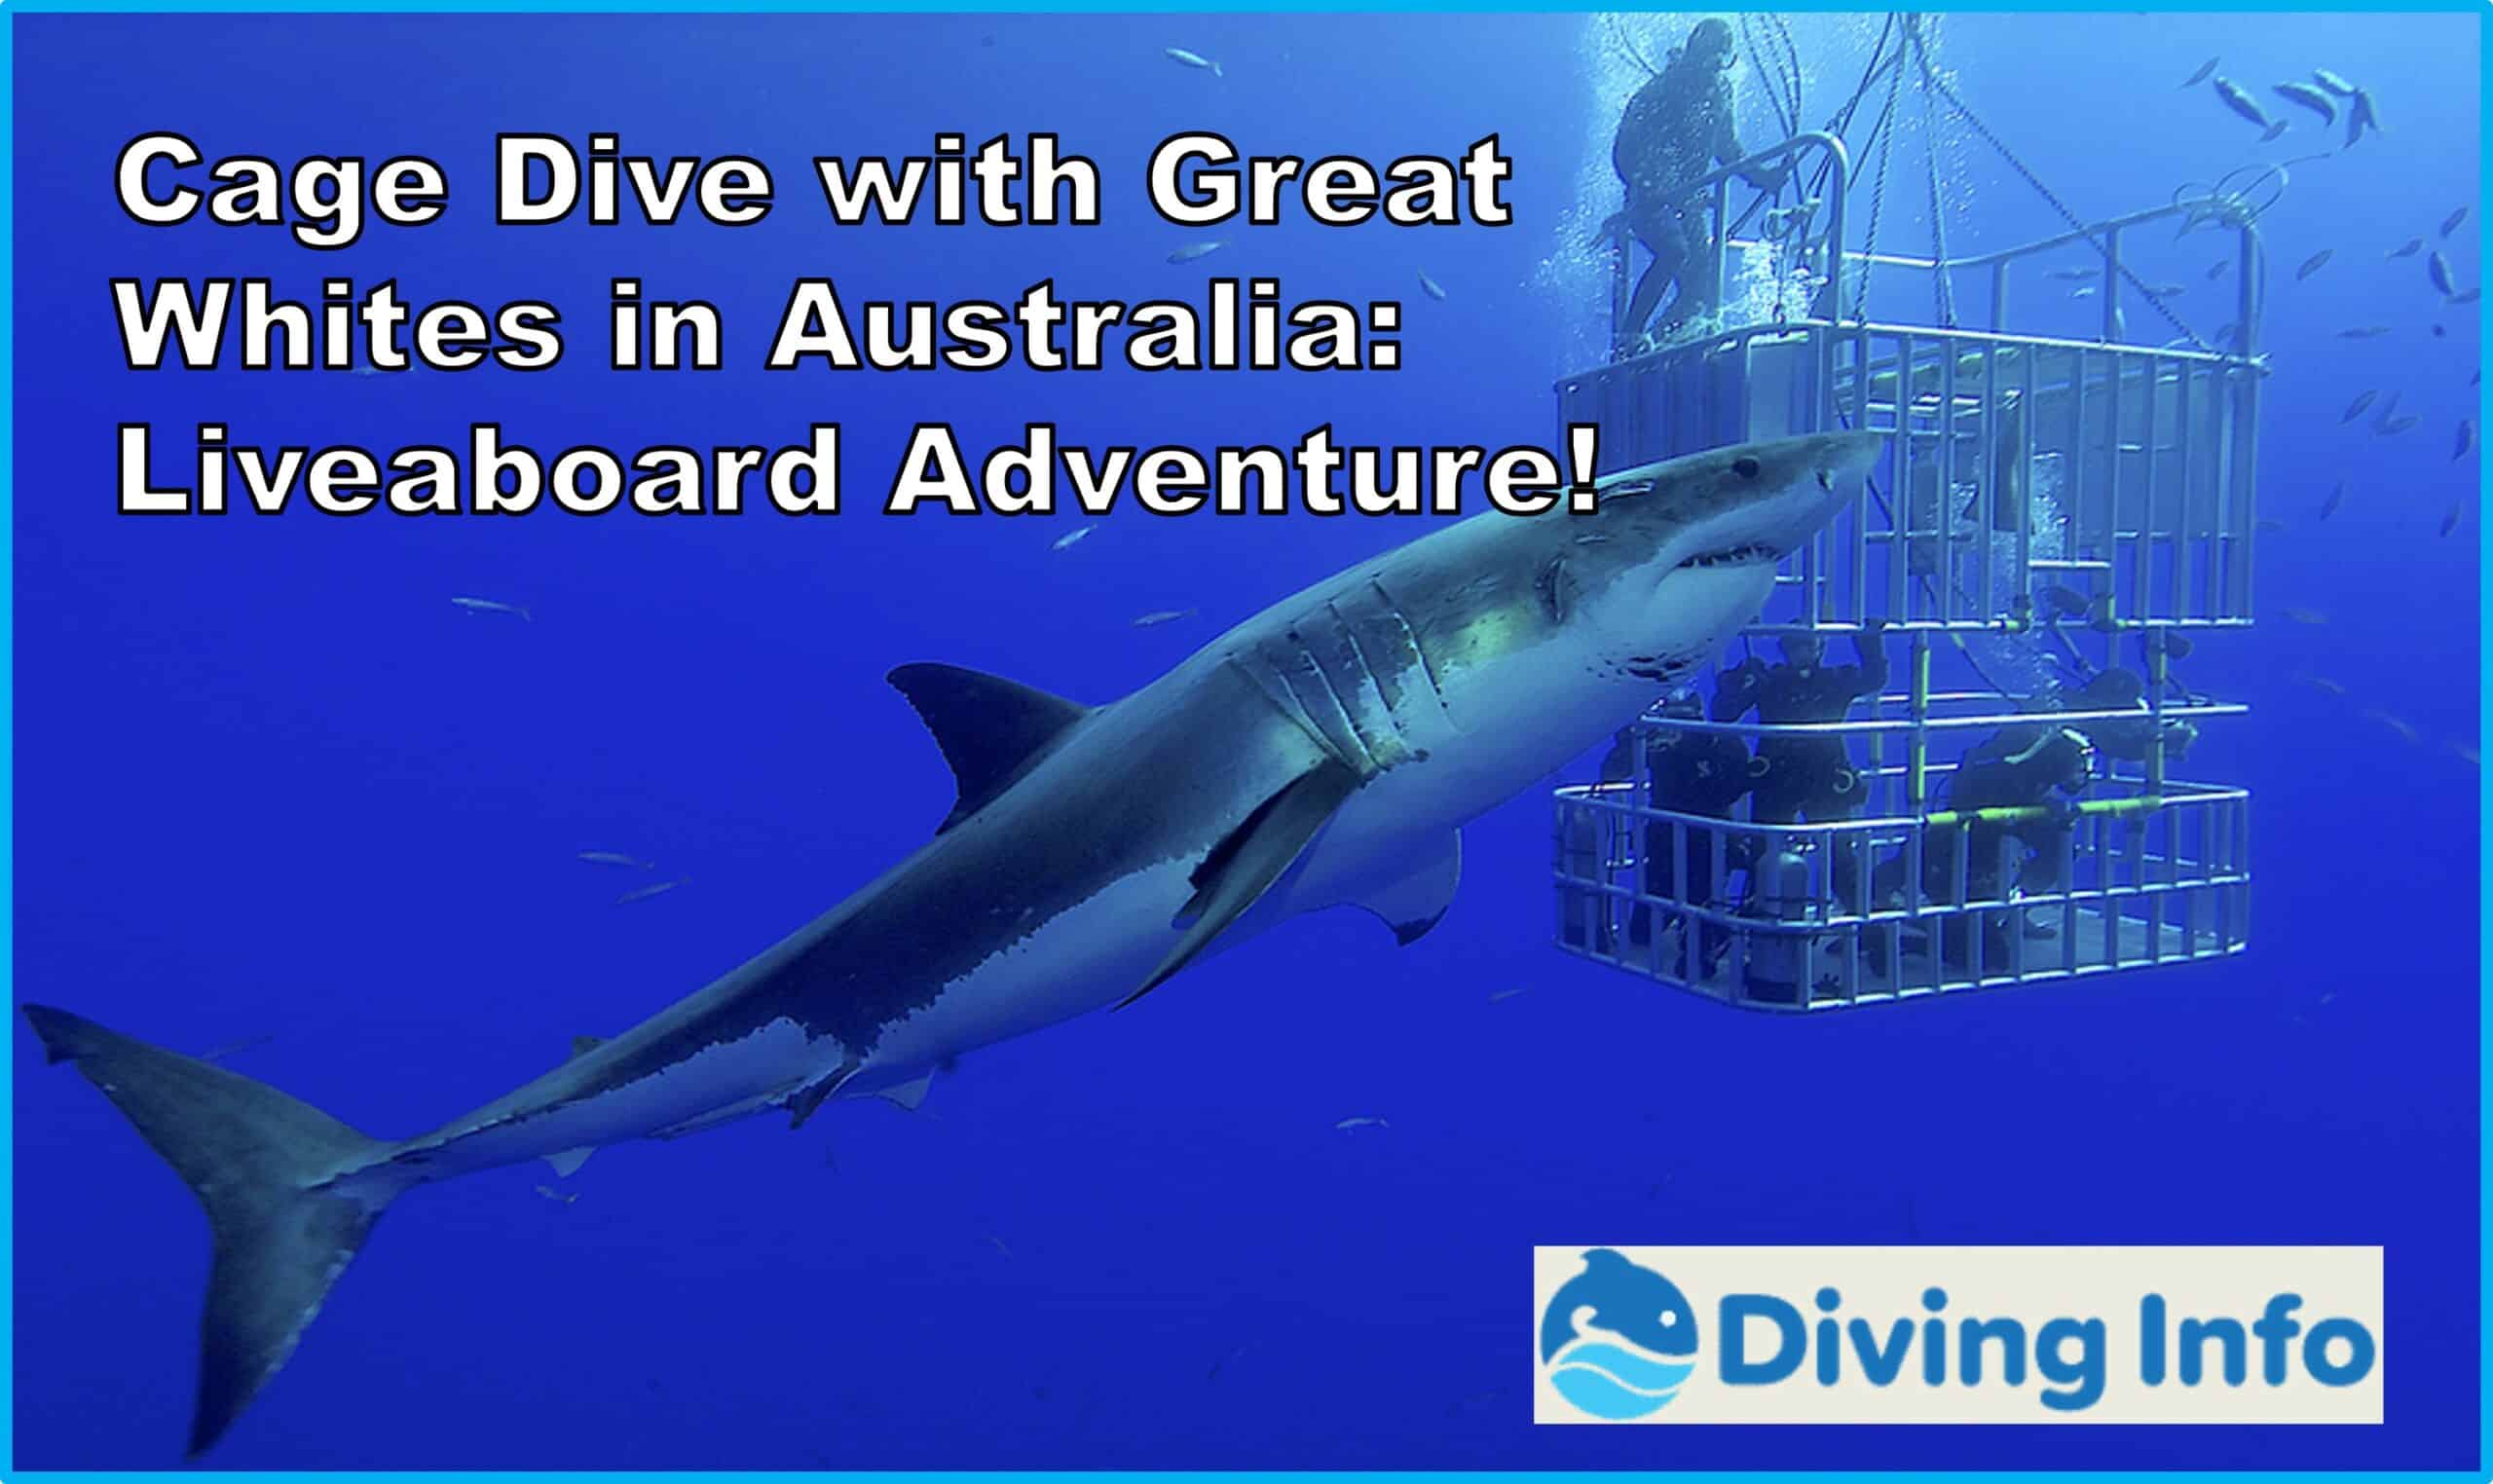 Cage Dive with Great Whites in Australia: Liveaboard Adventure!